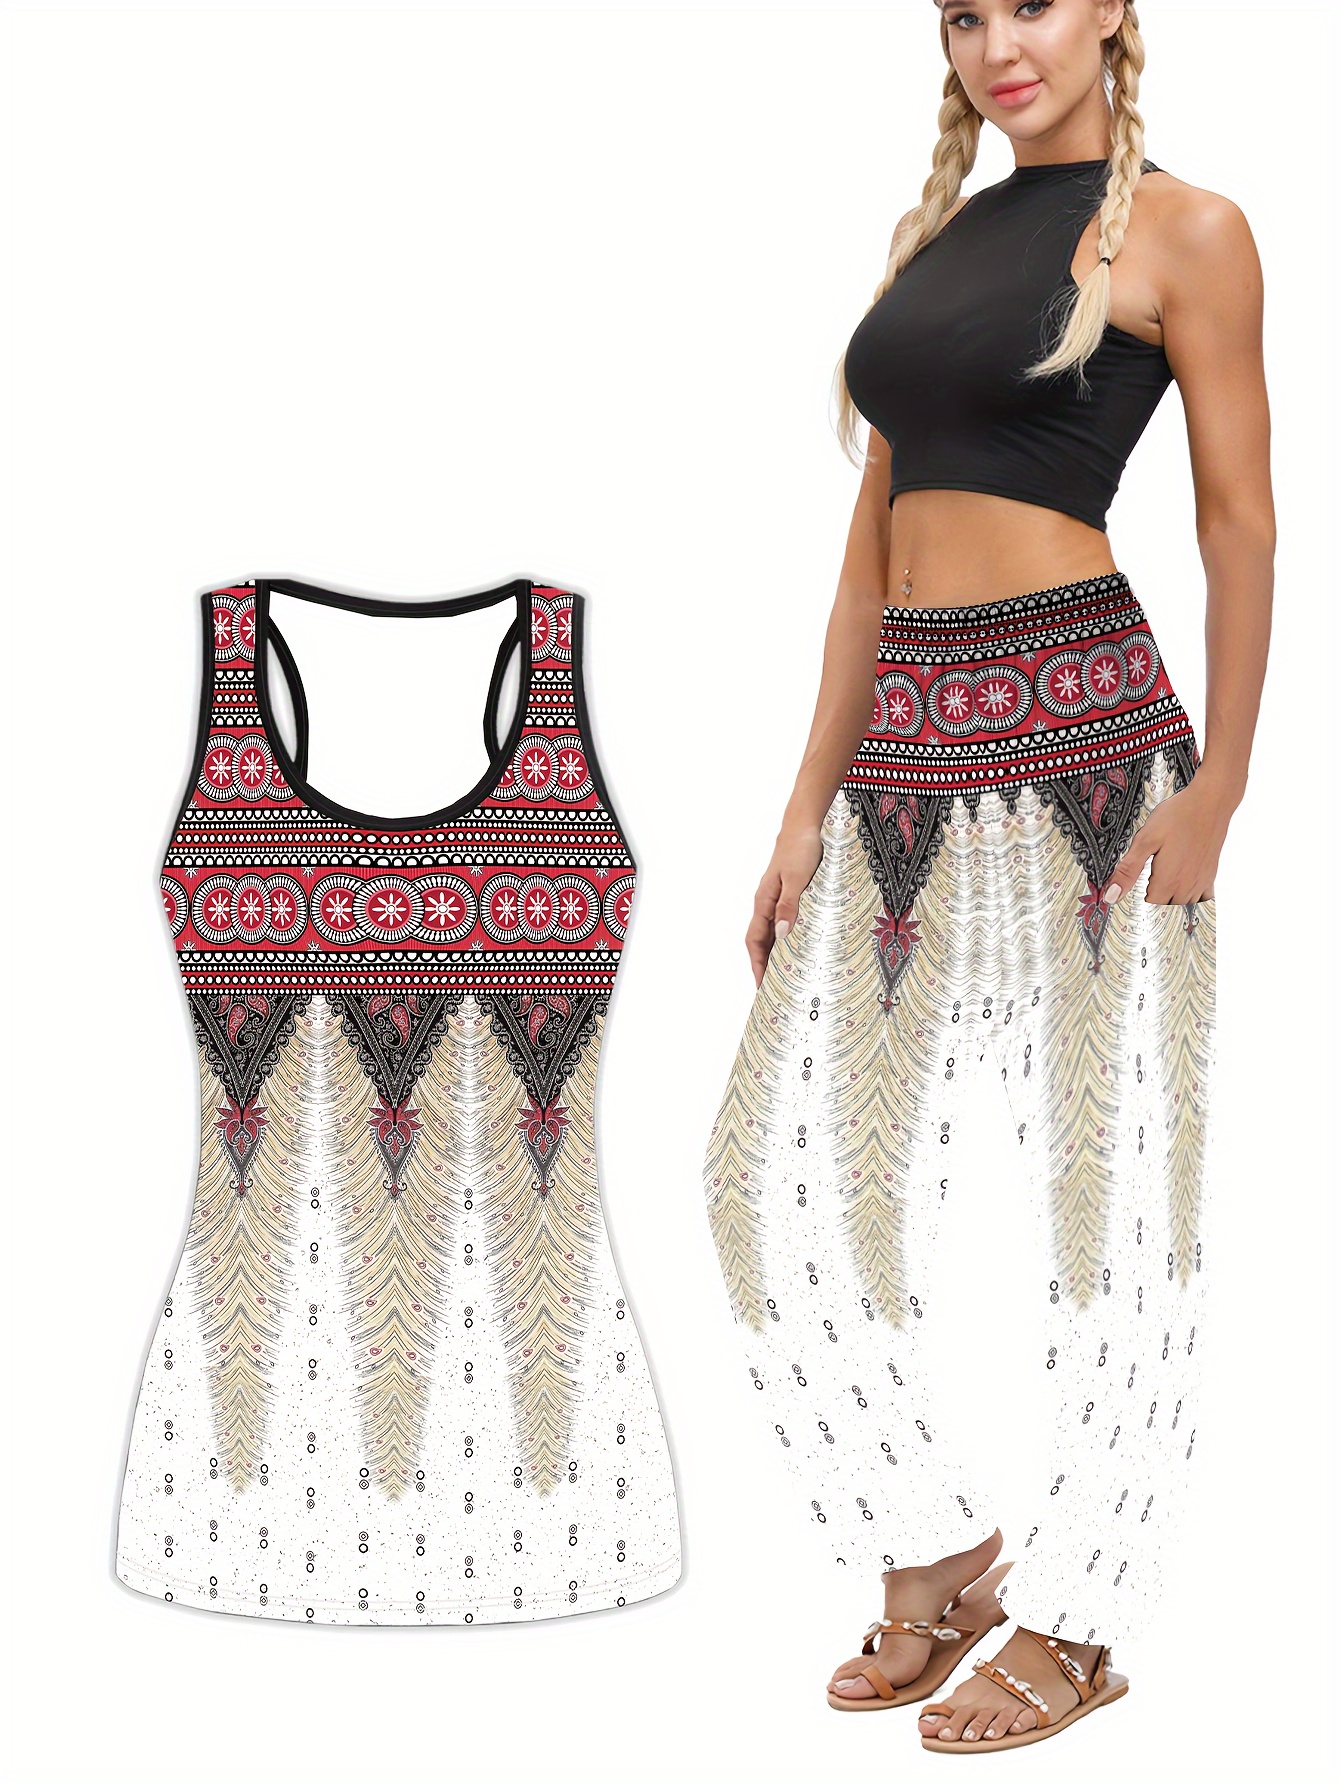 Buy Harem Pants Set With Sleeveless Top, Women Two Piece Outfit